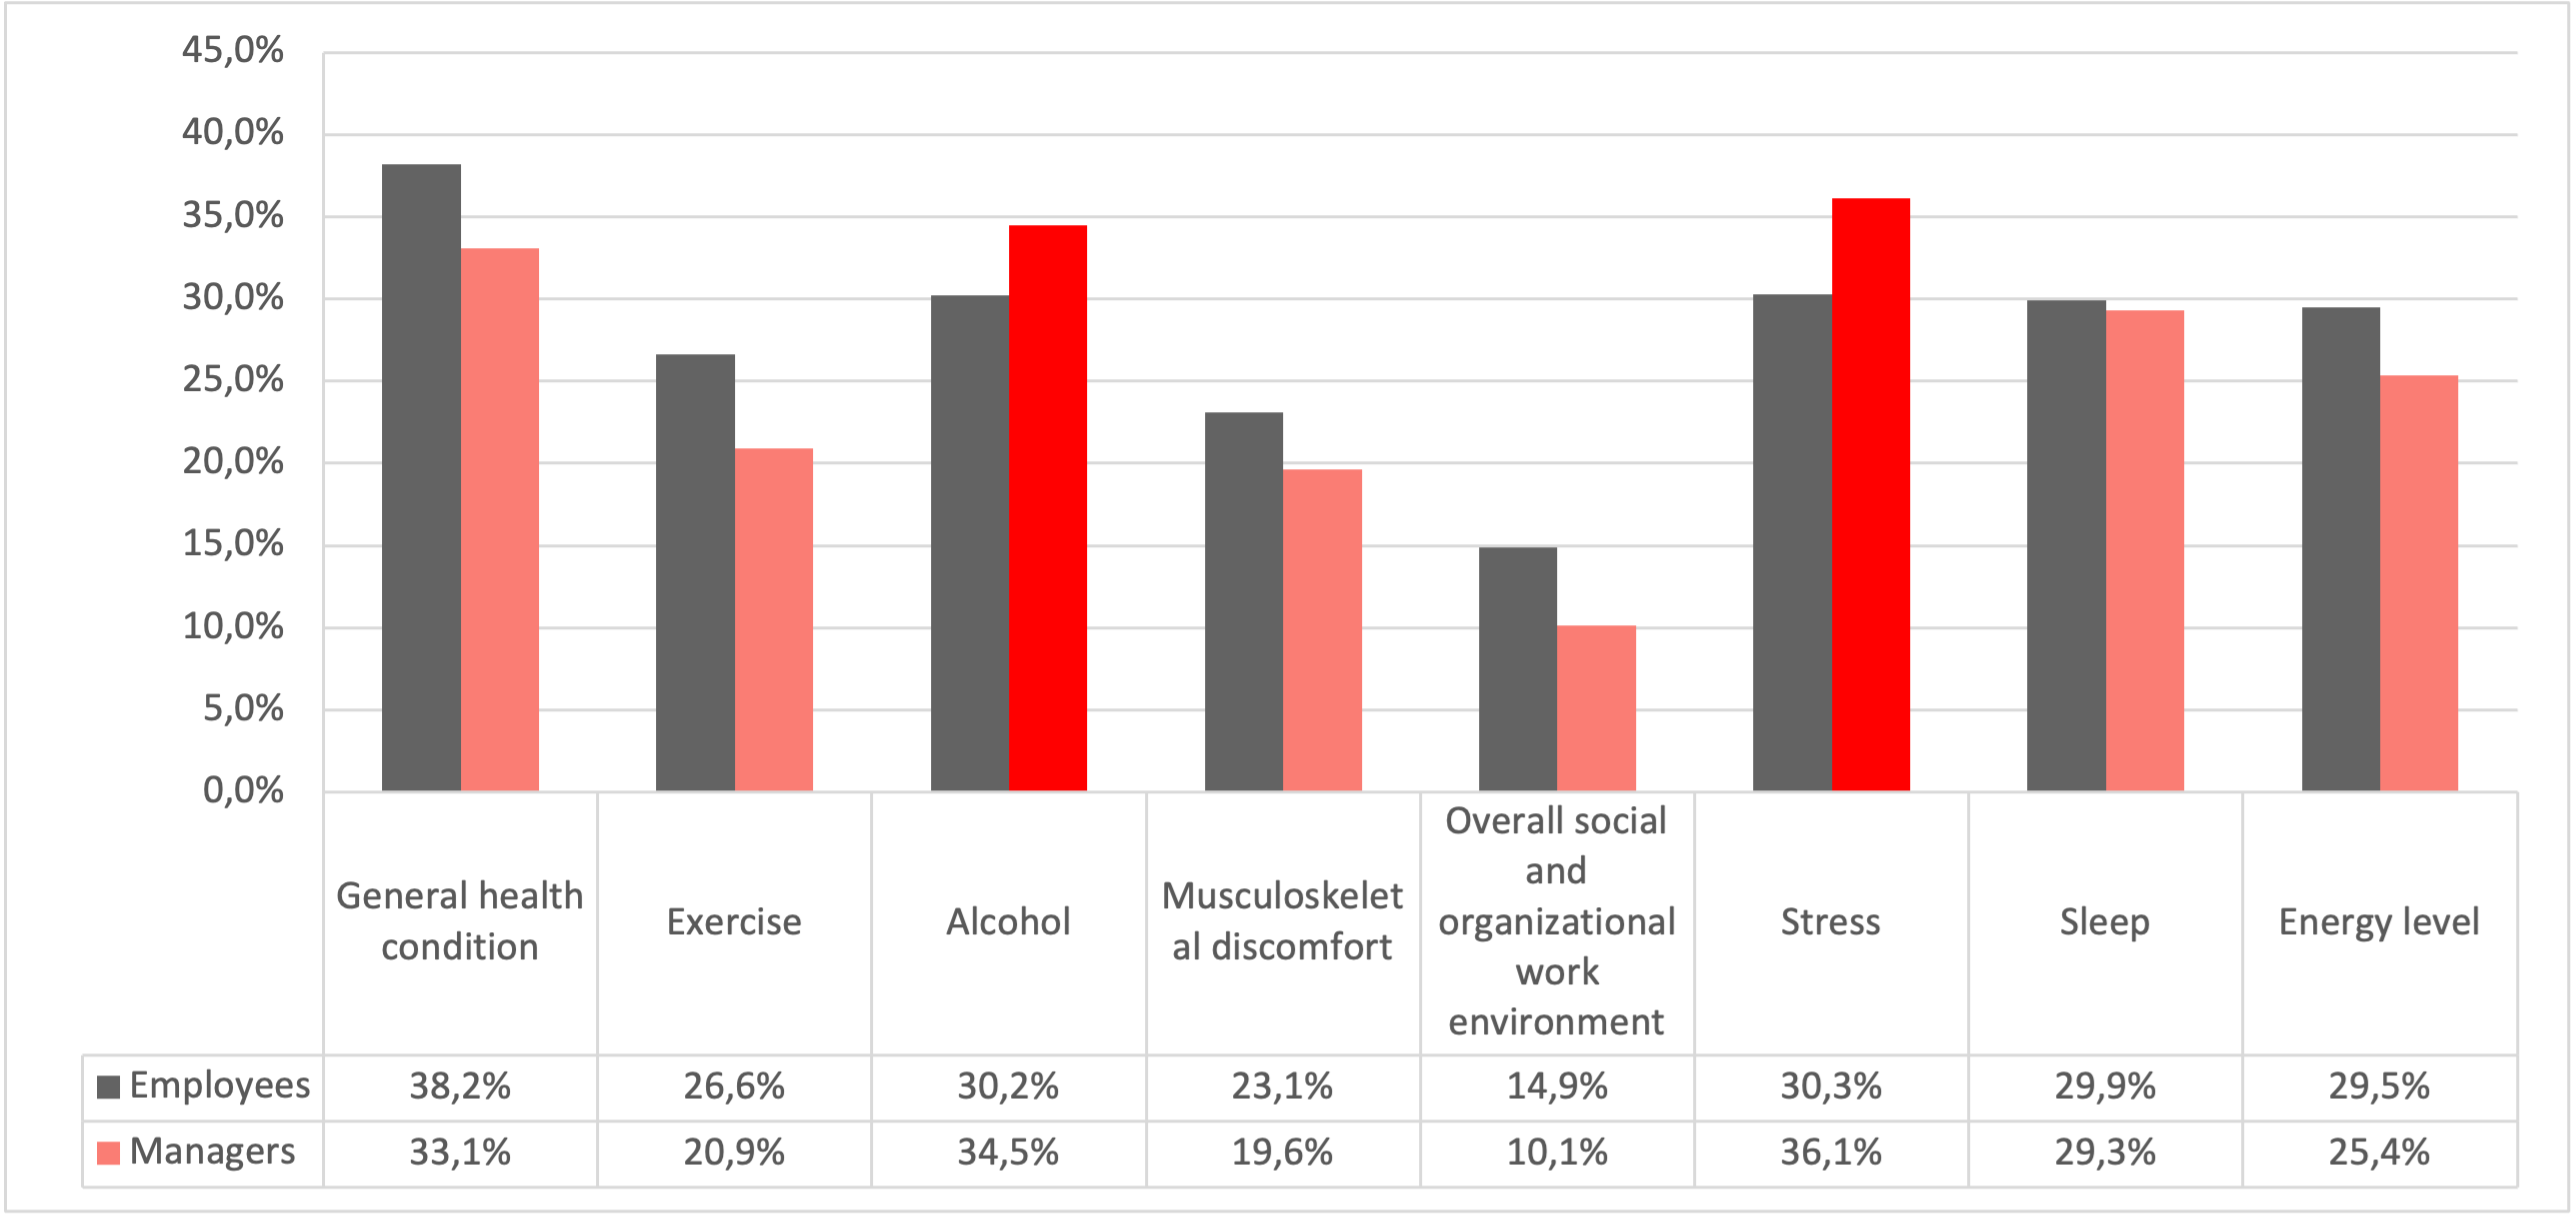  Table showing that managers experience more stress and more frequently use alcohol than employees.